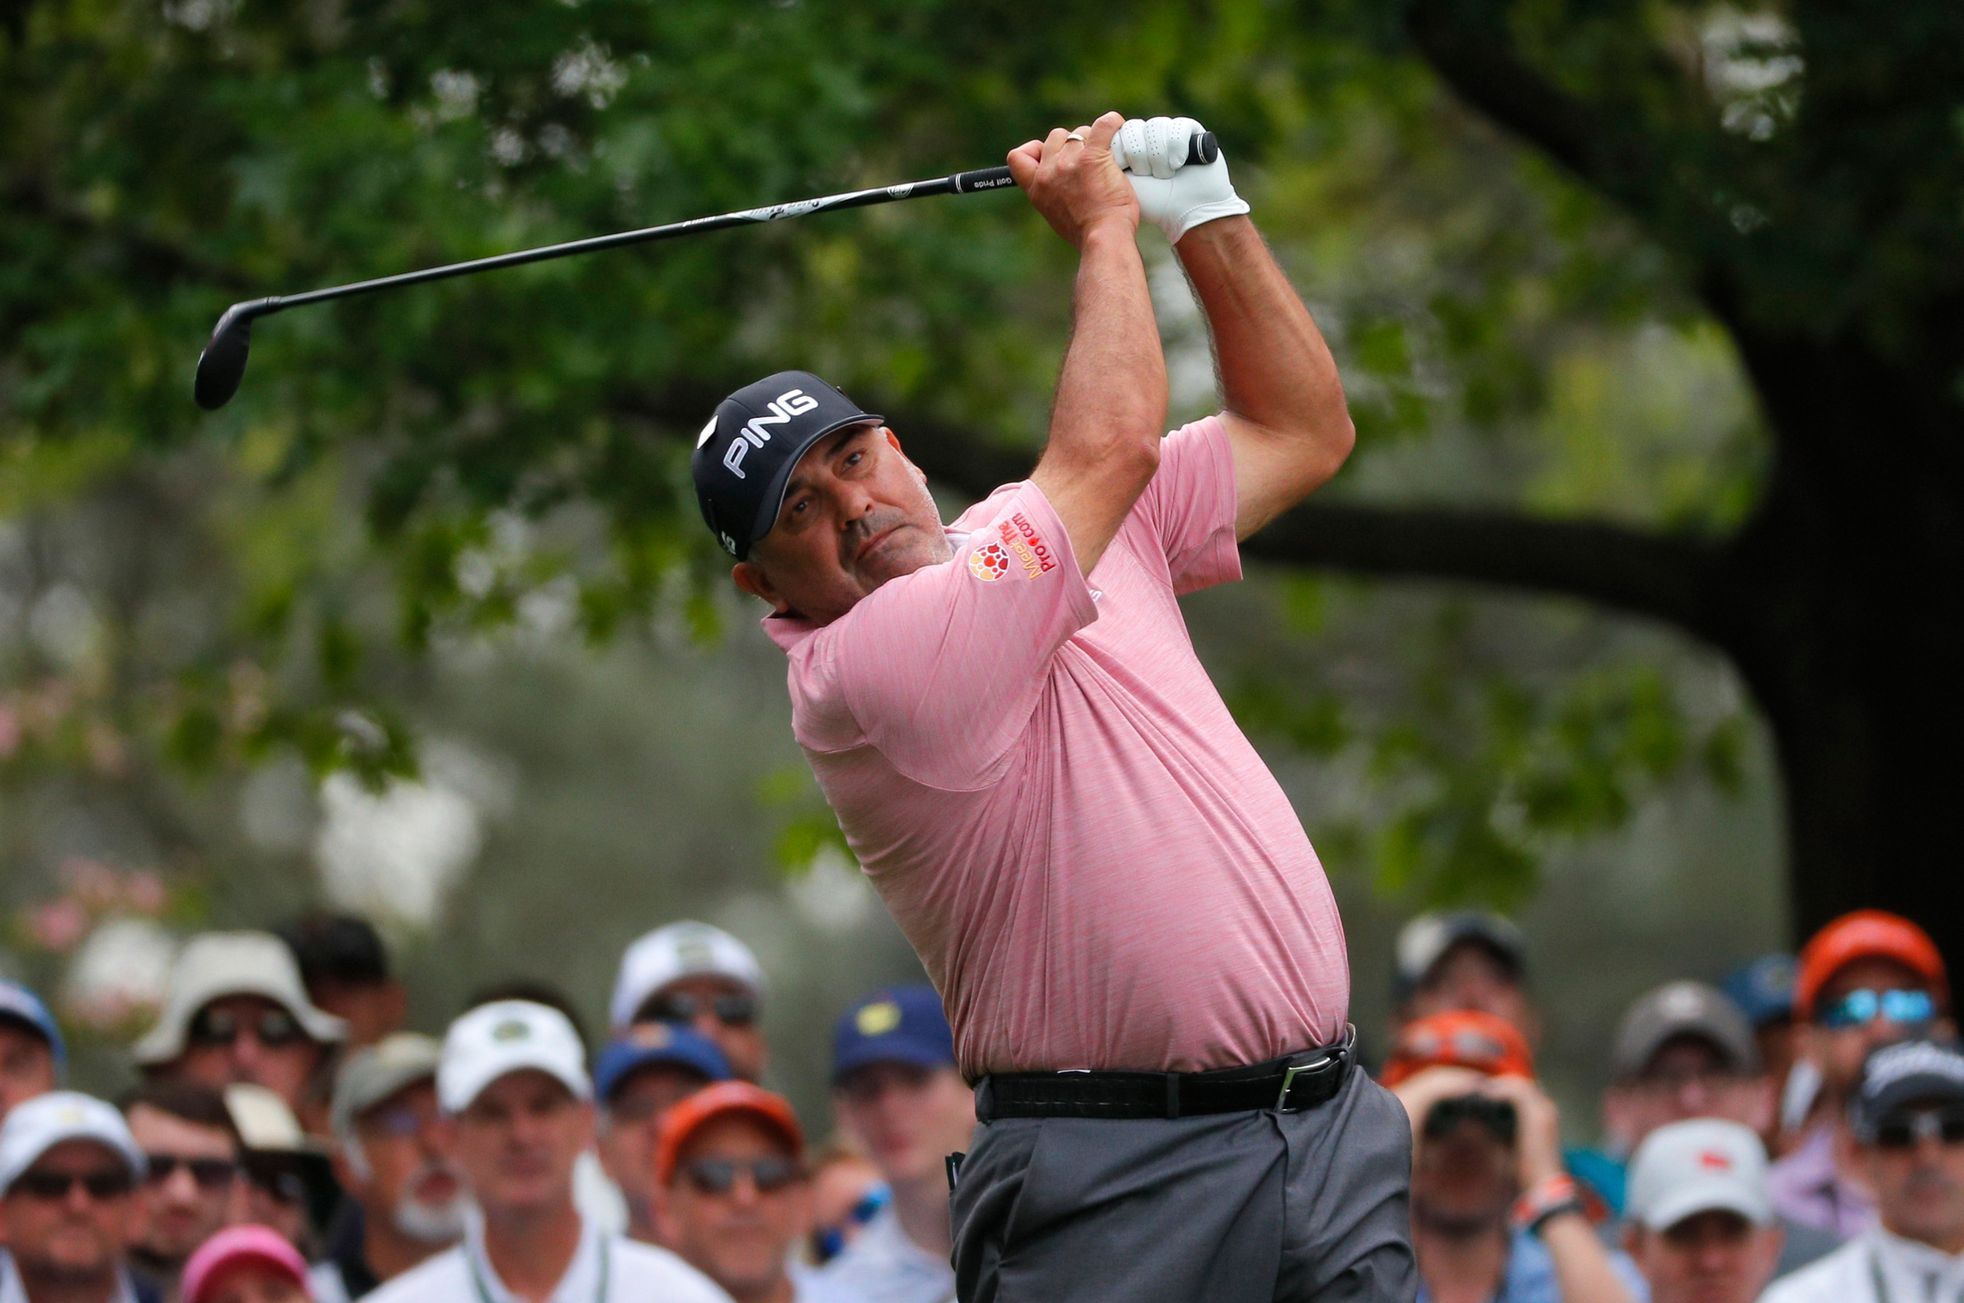 Angel Cabrera of Argentina hits off the 4th tee during first round play of the 2019 Master golf tournament at Augusta National Golf Club in Augusta, Georgia, U.S.